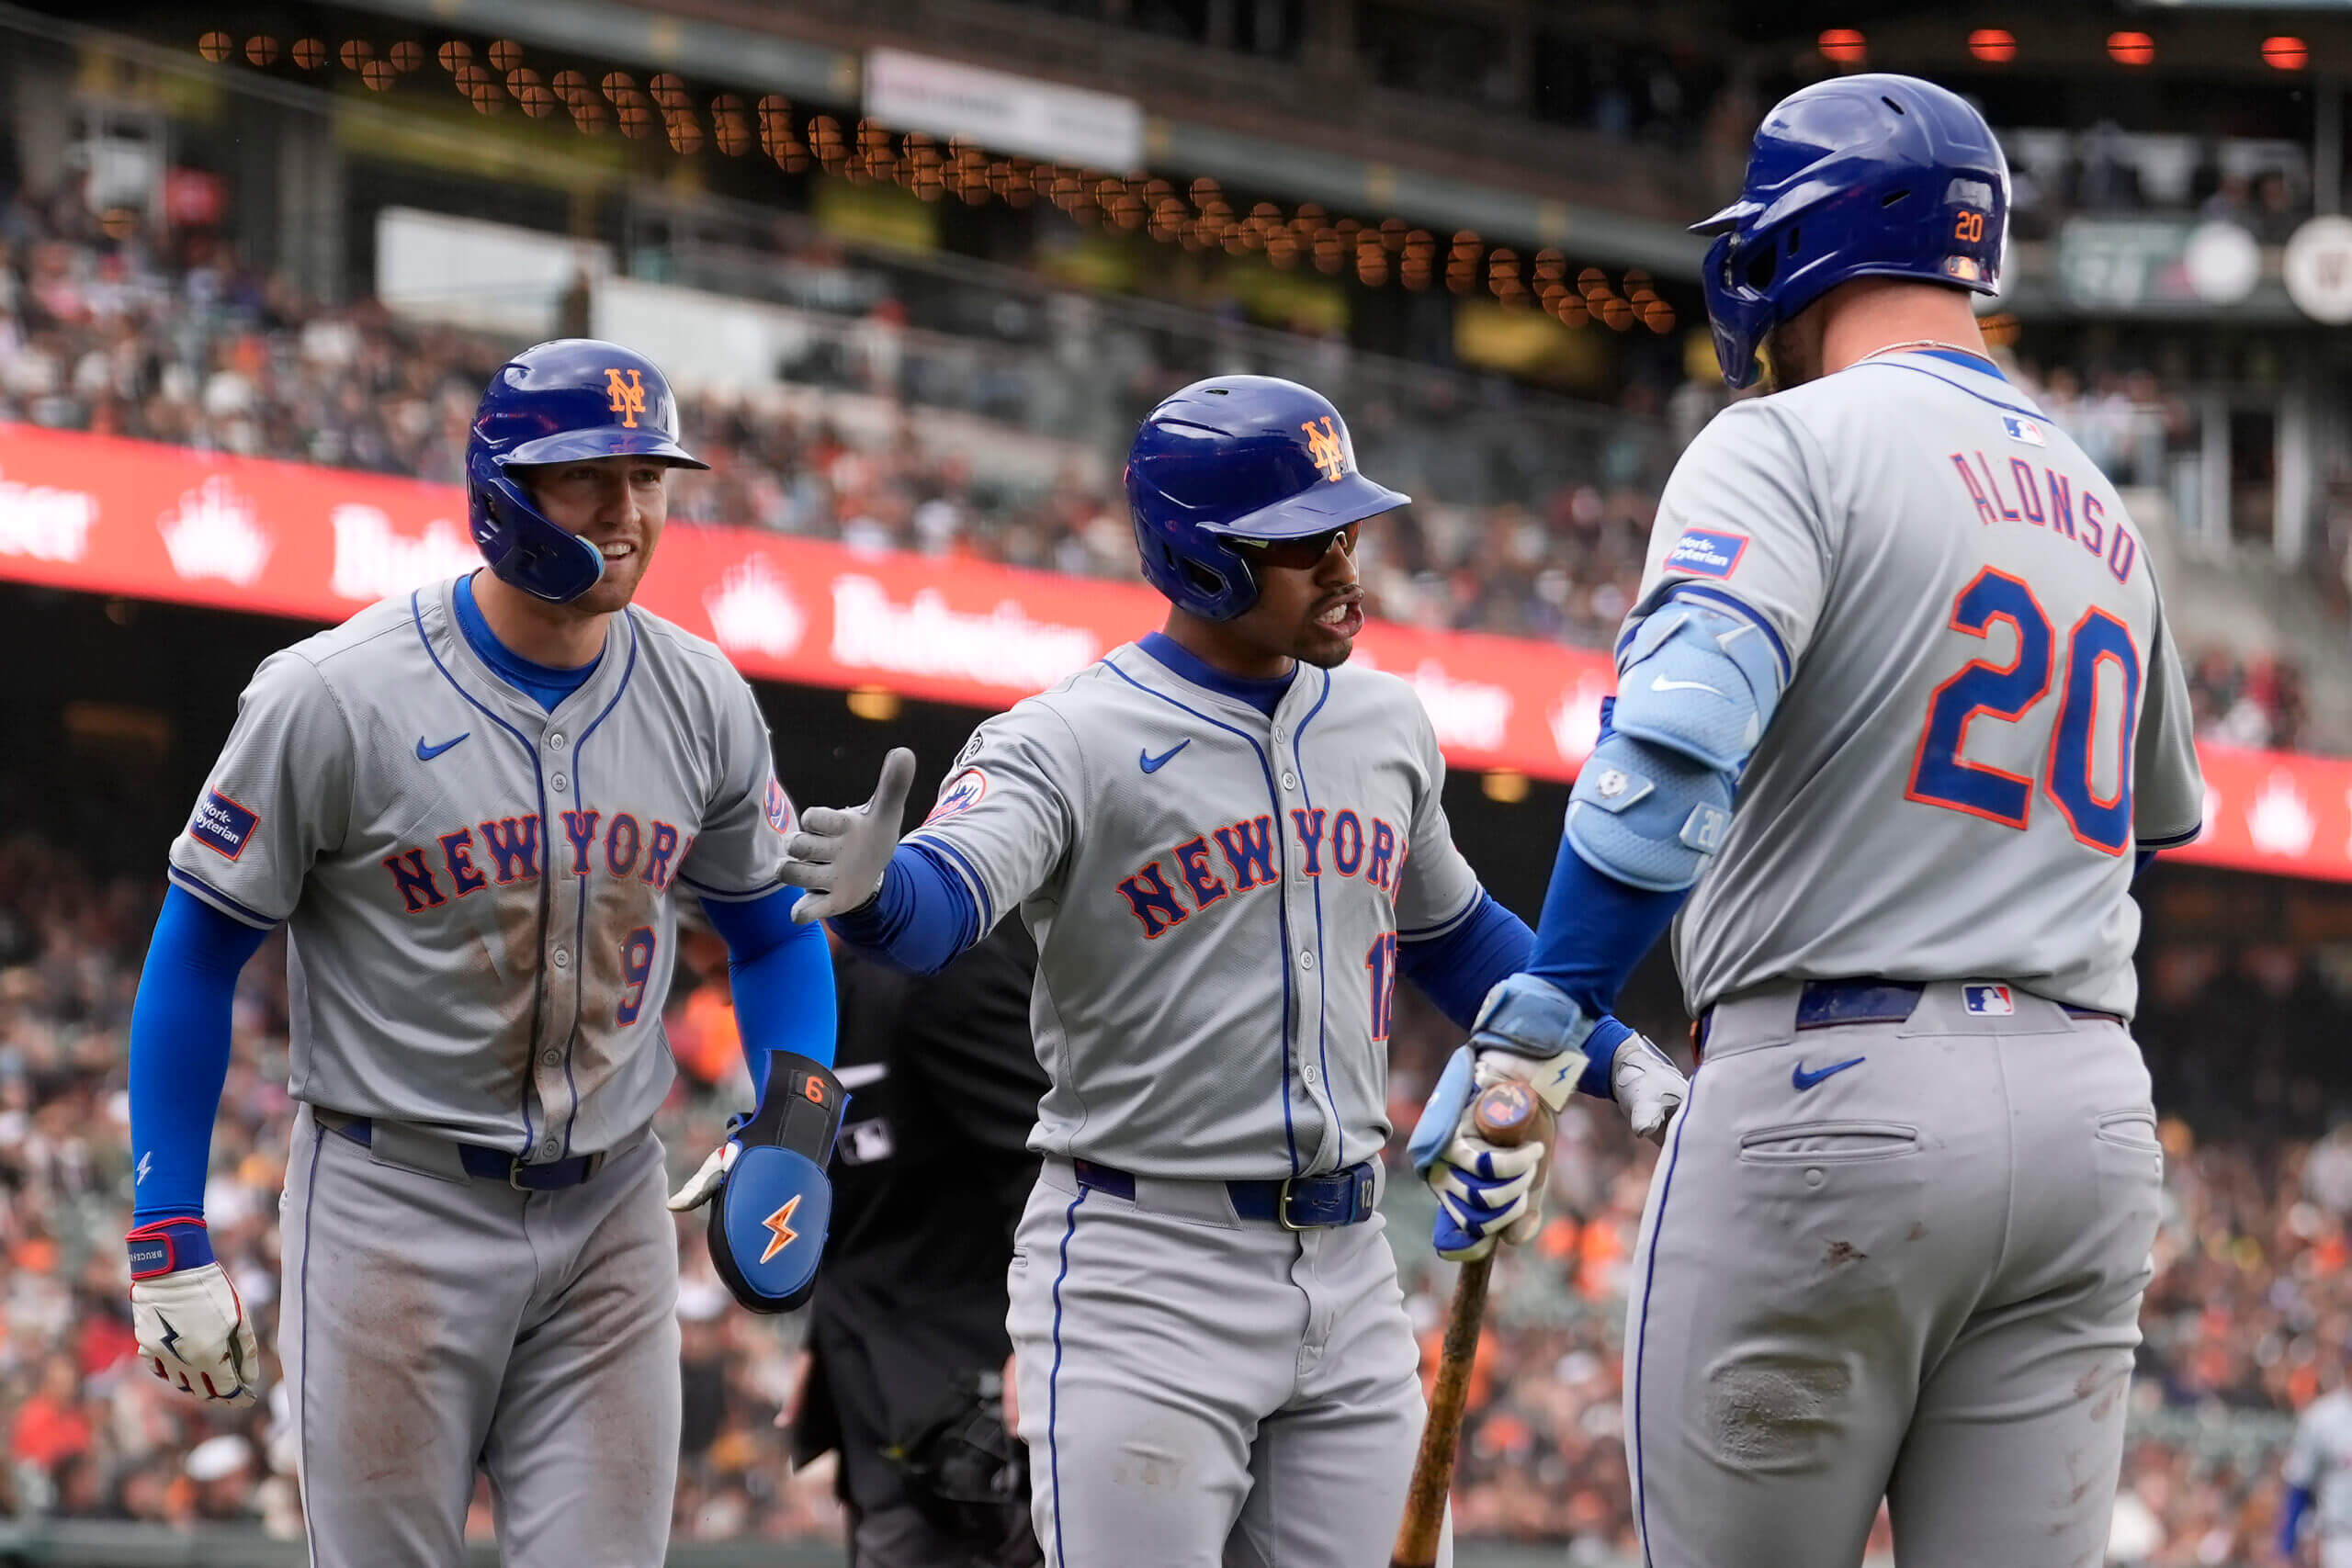 Rosenthal: By getting Pete Alonso in the Home Run Derby, MLB shortchanged two of his Mets teammates